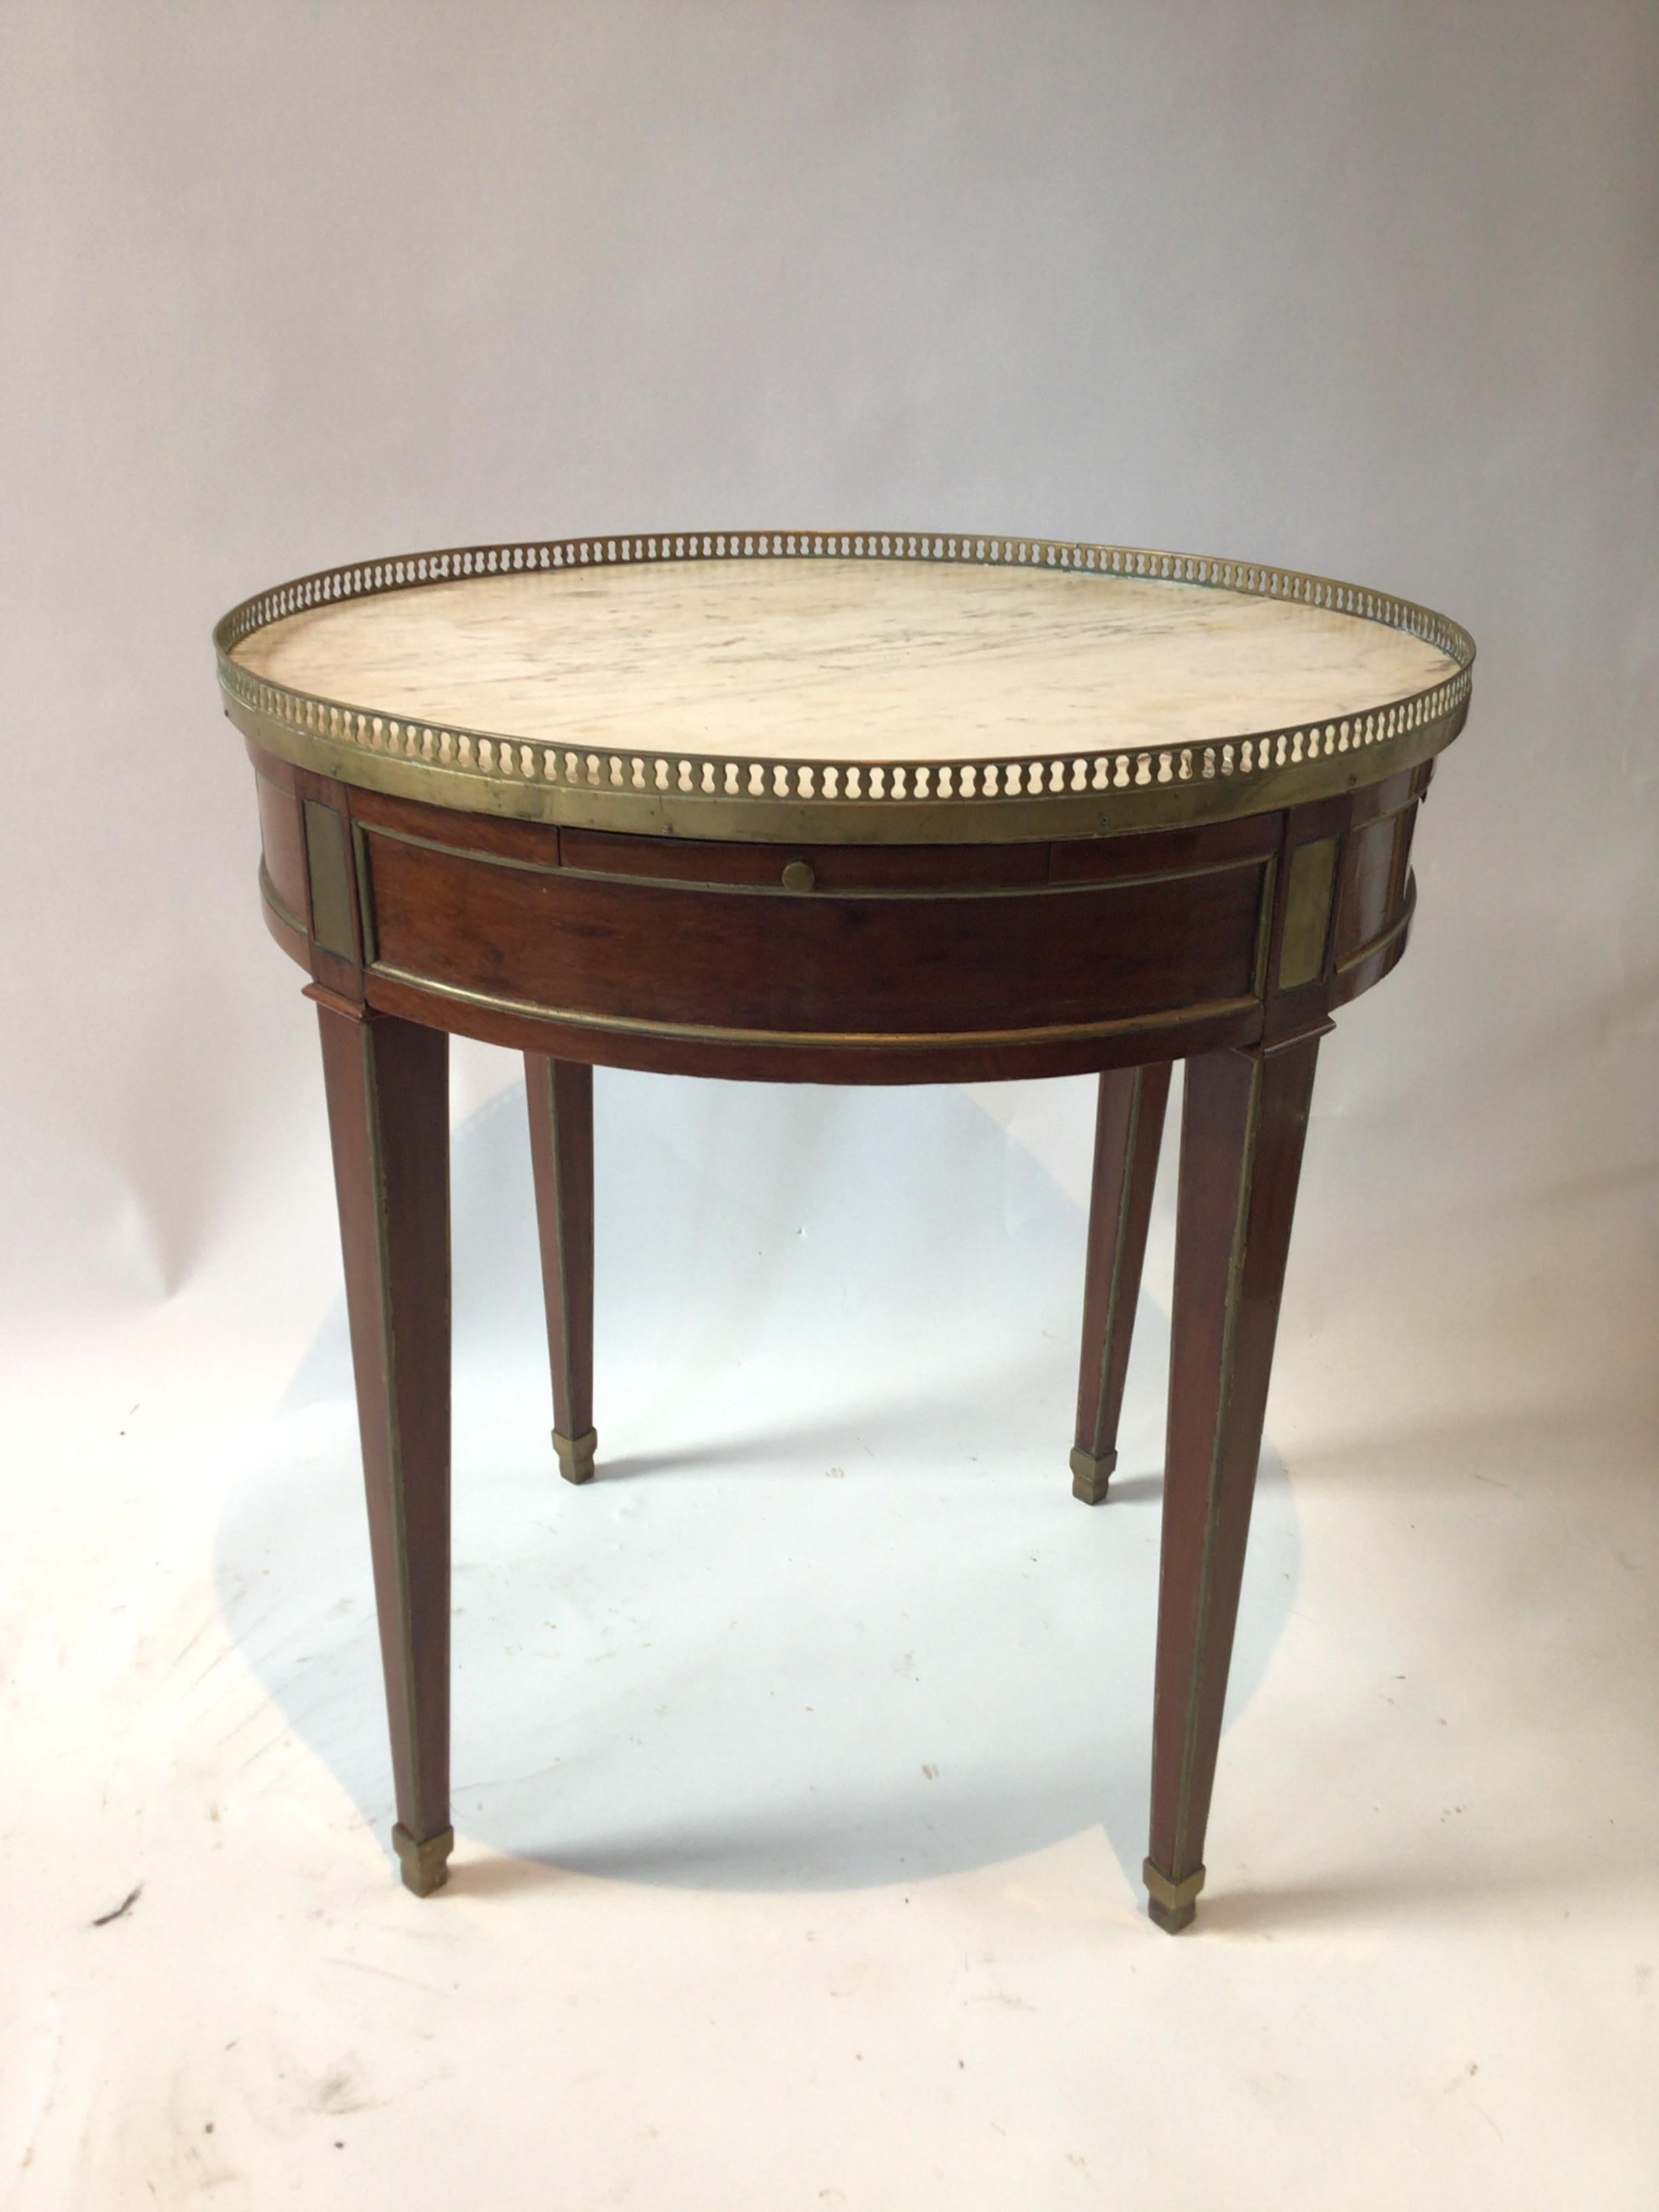 1880s French marble top side table with brass accents. There’s a crack the length of the marble as seen in image 4. The marble is secure and tight.